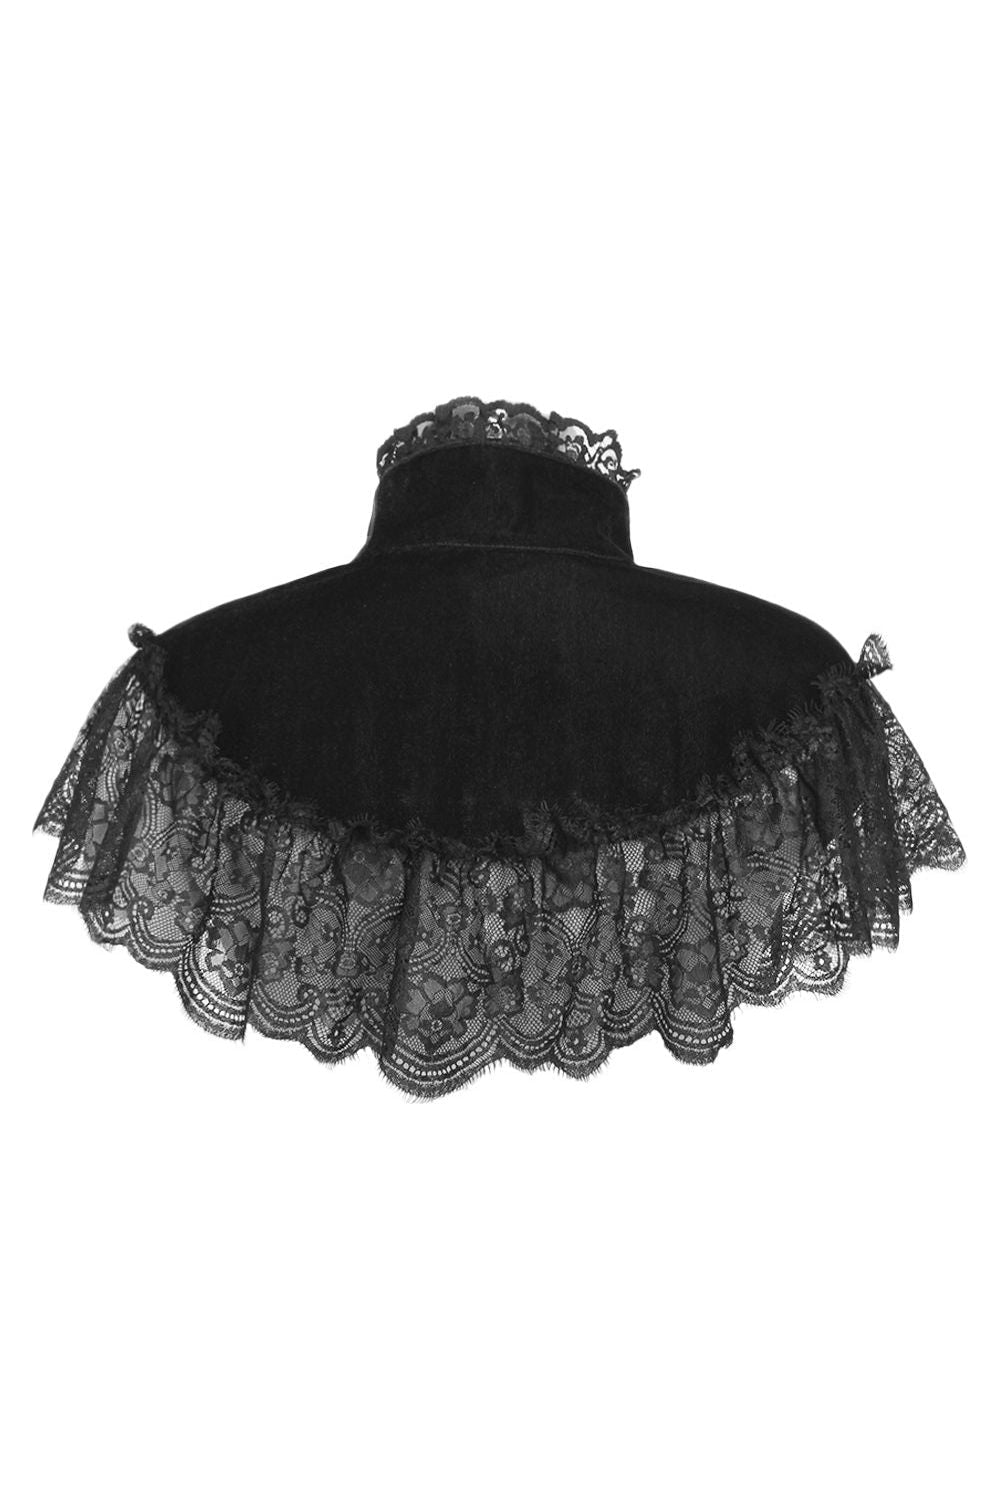 Velvet and Lace Capelet by Daisy Corsets in 4 Color Choices in One Size